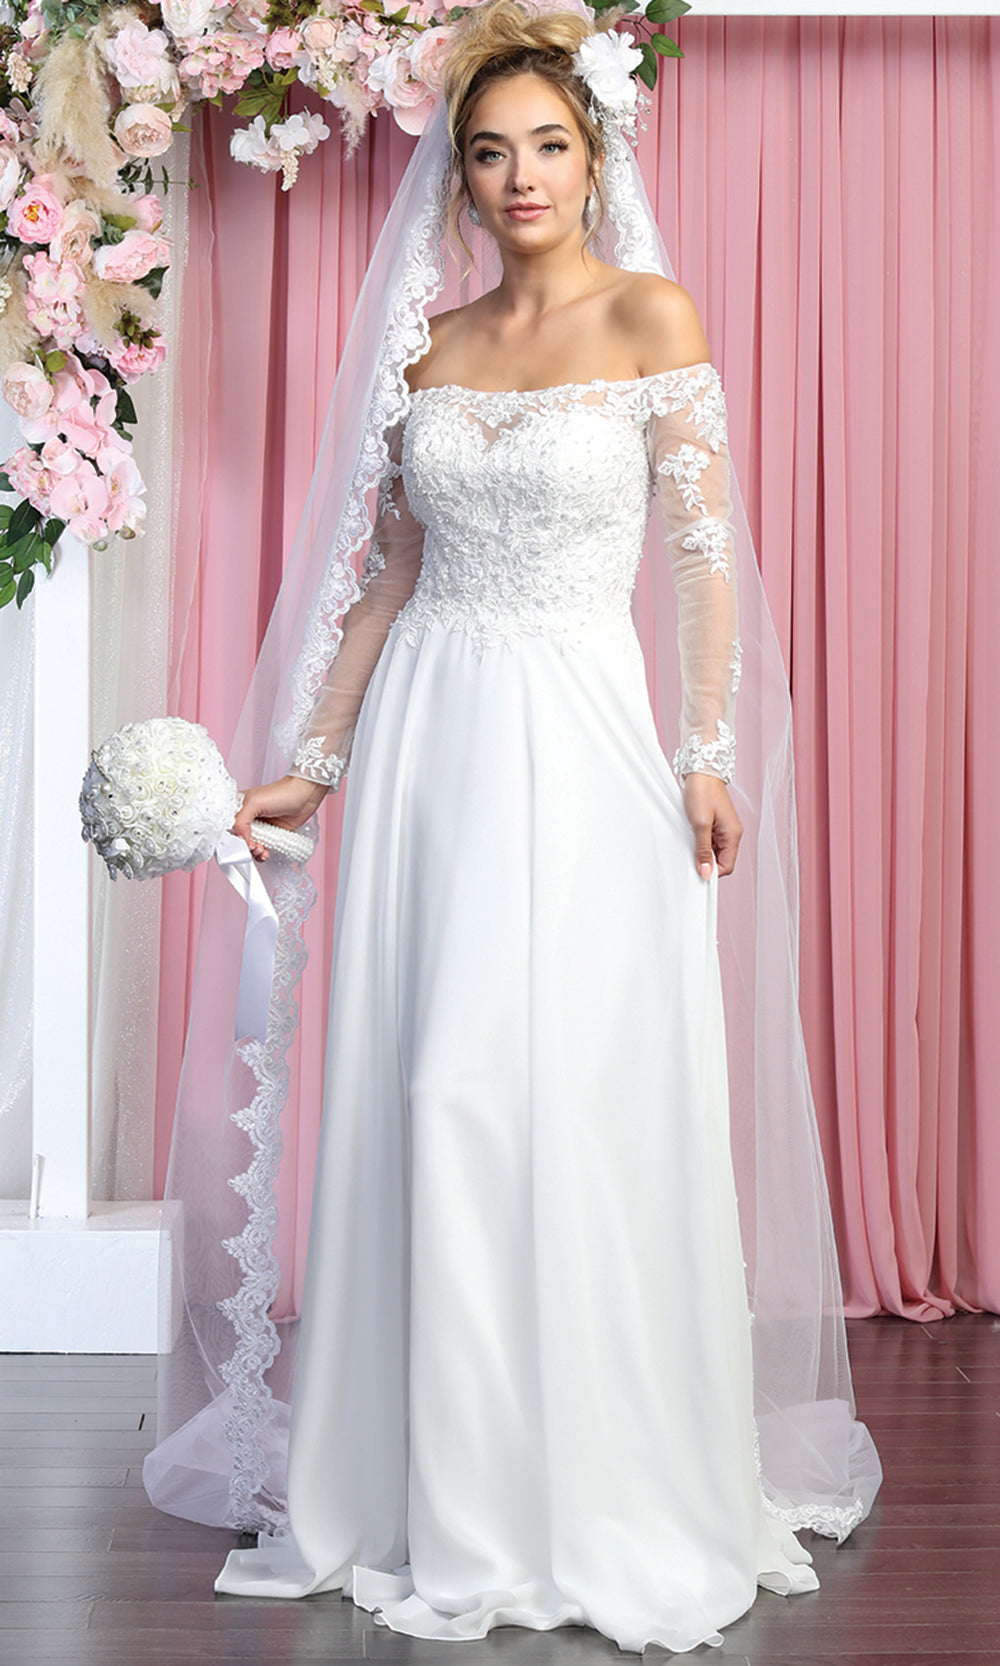 May Queen Bridal RQ7909 Ivory